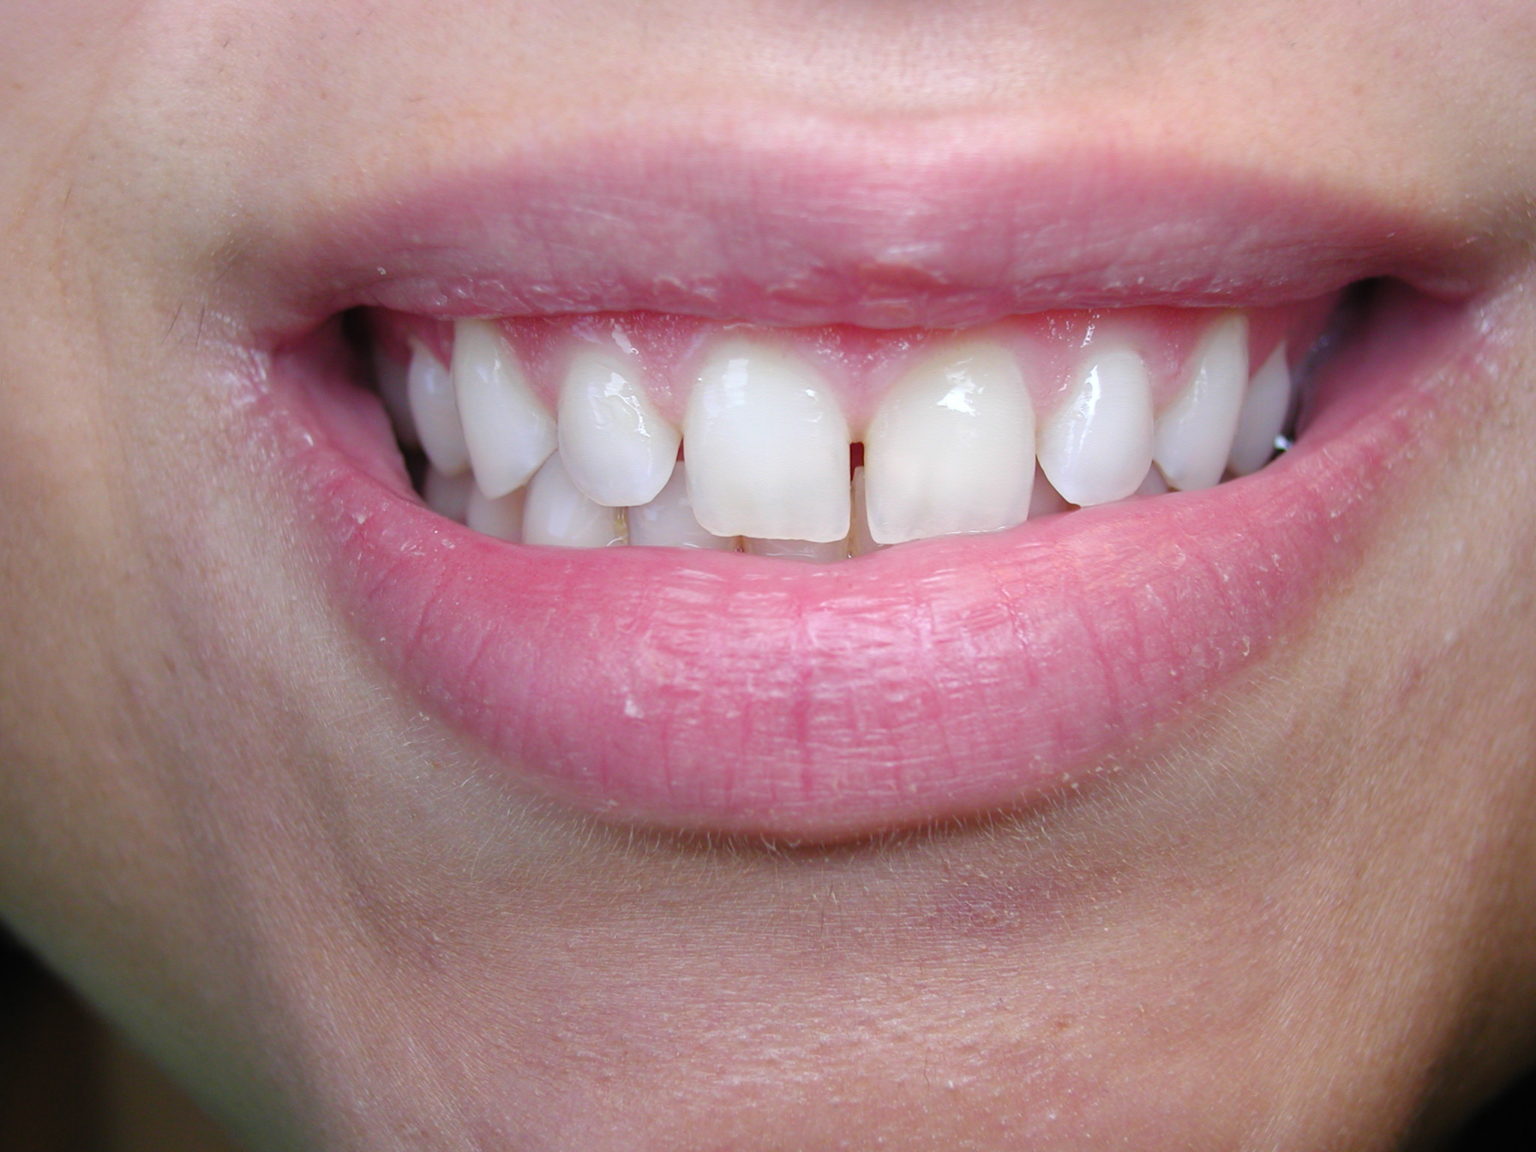 Dental Bonding A Relatively Inexpensive Way To Close Gaps Between Front Teeth Dr Mark